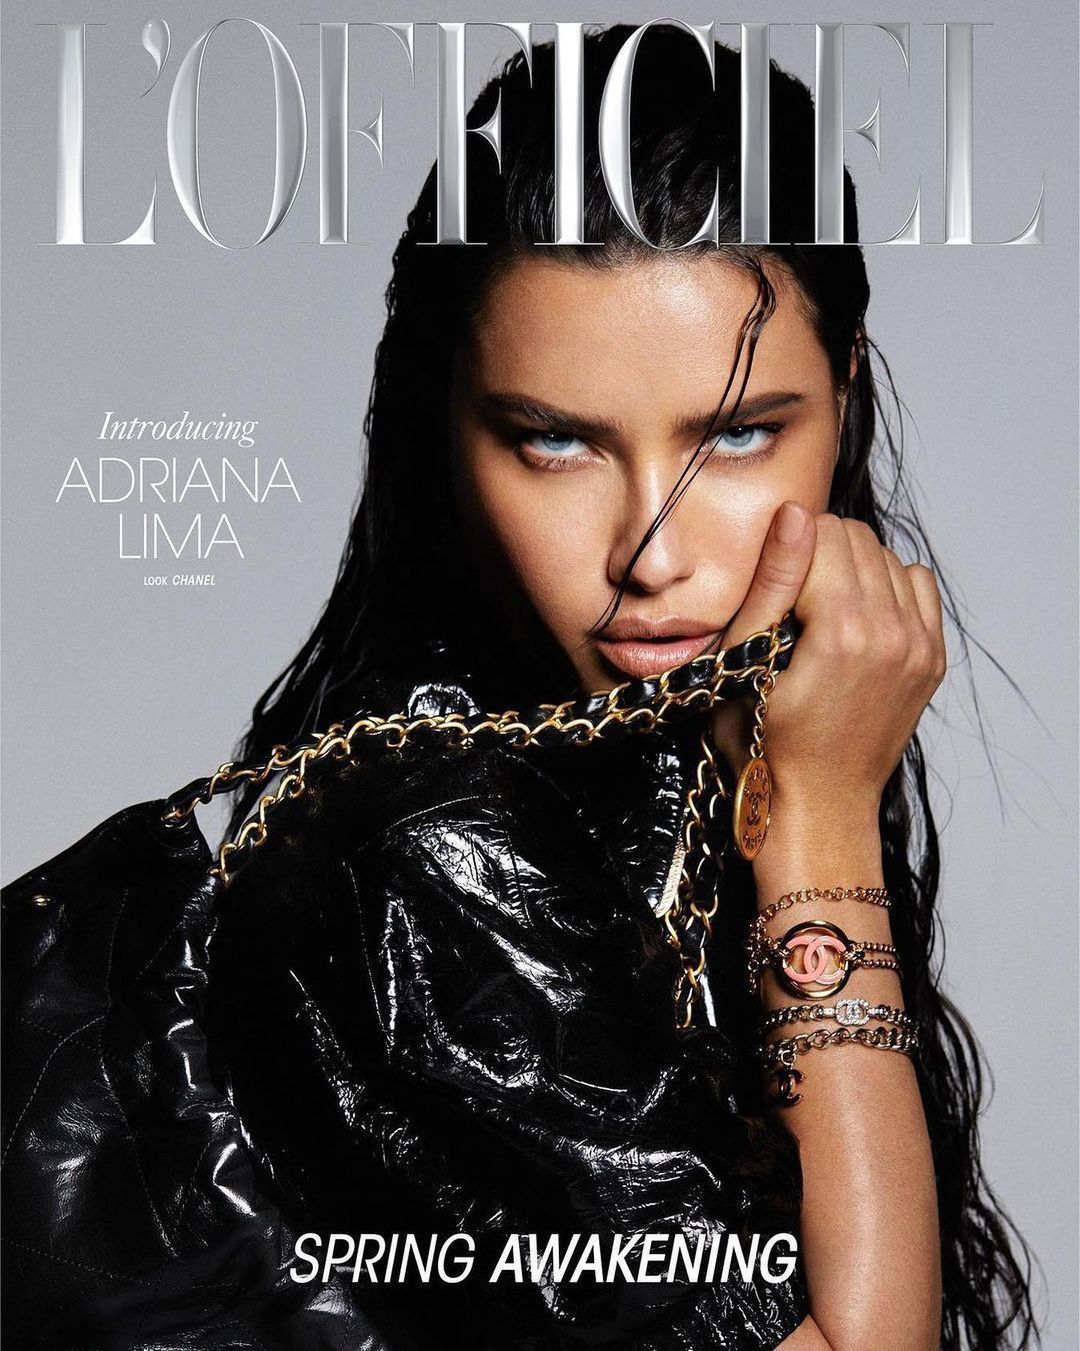 ???? @lofficielitalia  @lofficielparis #SPRINGAWAKENING - This year, Adriana Lima - arguably one of the most successful models of all time - is celebrating 25 years in the industry.
L’Officiel Italia N.42 Spring 2022 on newsstands starting from February 26th. 
Talent @adrianalima
Text by @caroline_grosso 
Photography @marcuscooper
Styling by @luca_falcioni_
Hair @andrewfitzsimons
Makeup @adamburrell ????